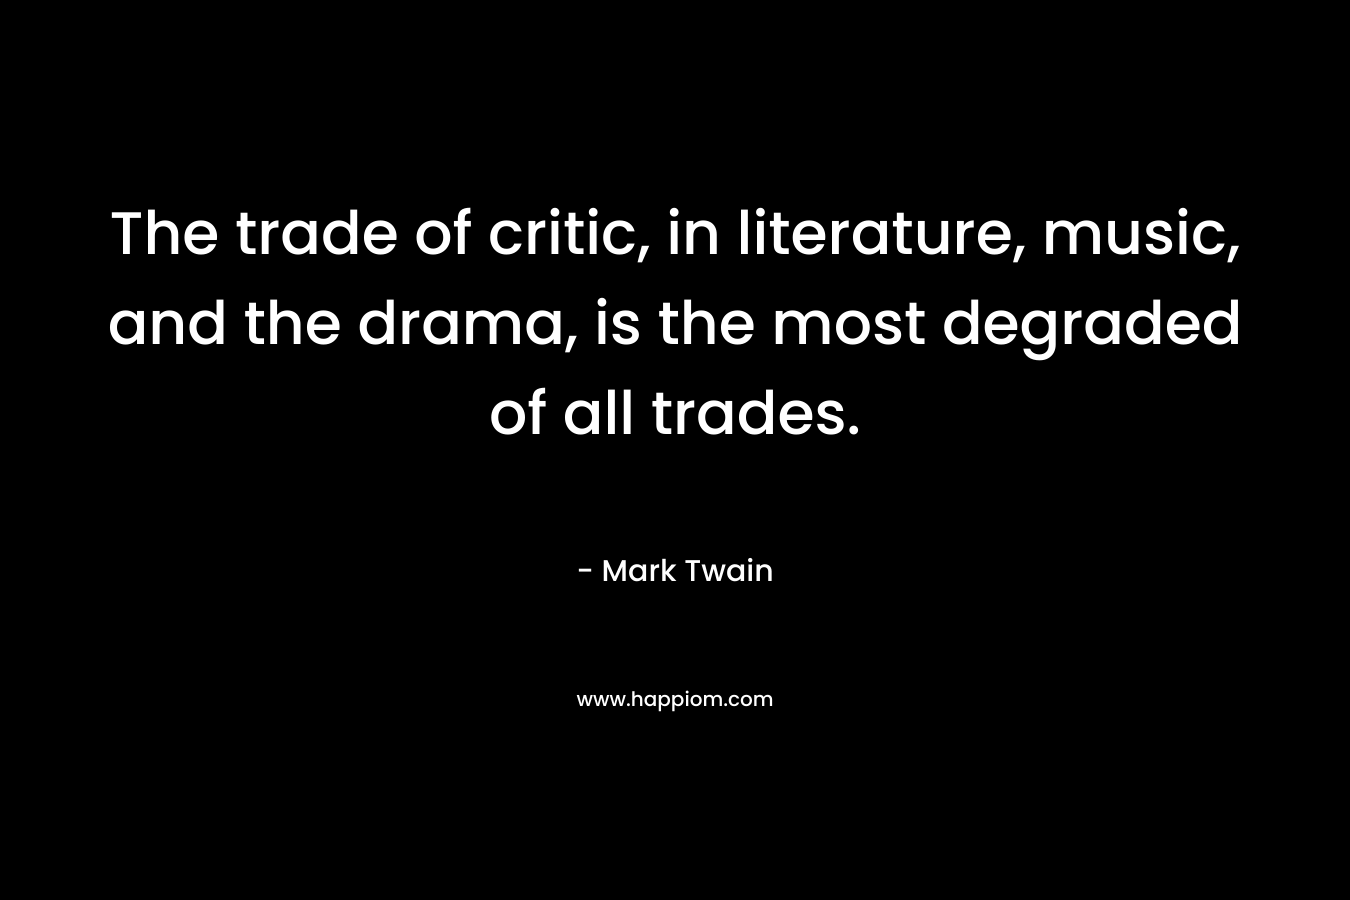 The trade of critic, in literature, music, and the drama, is the most degraded of all trades.